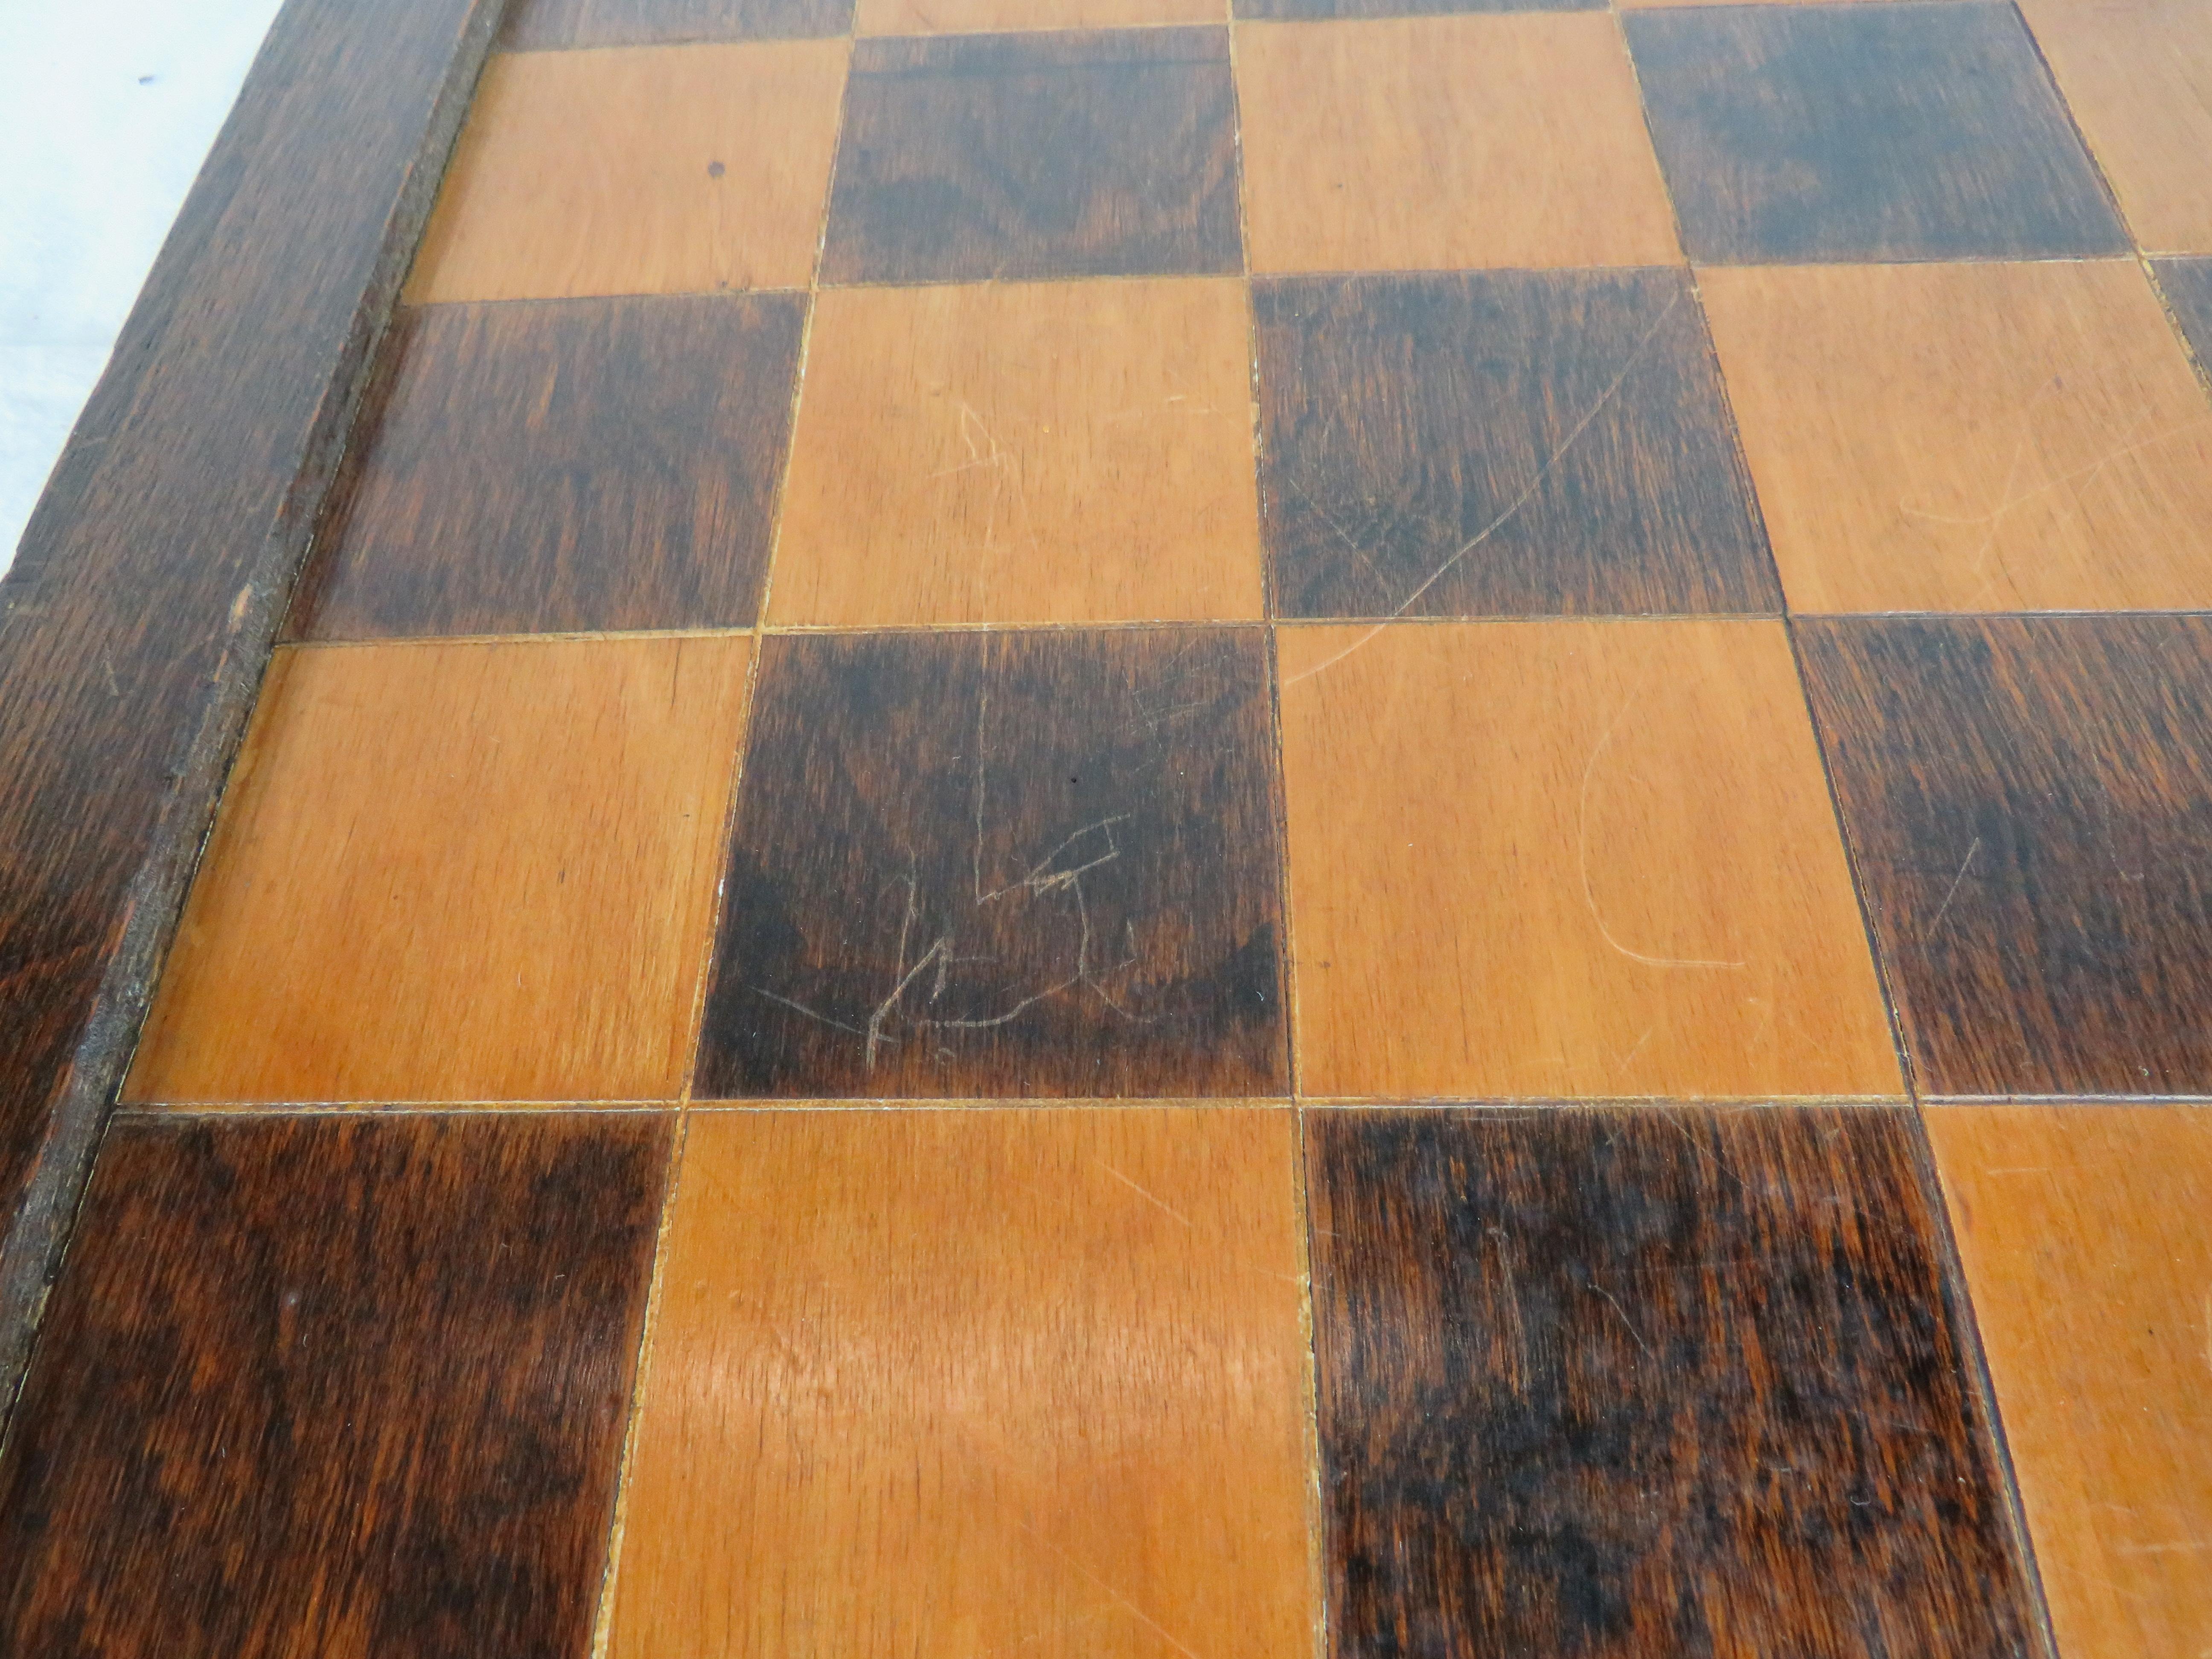 Late 19th/early 20th century checkerboard with inlaid contrasting woods. Converted to wall hanging with felted reverse and hanging clip.